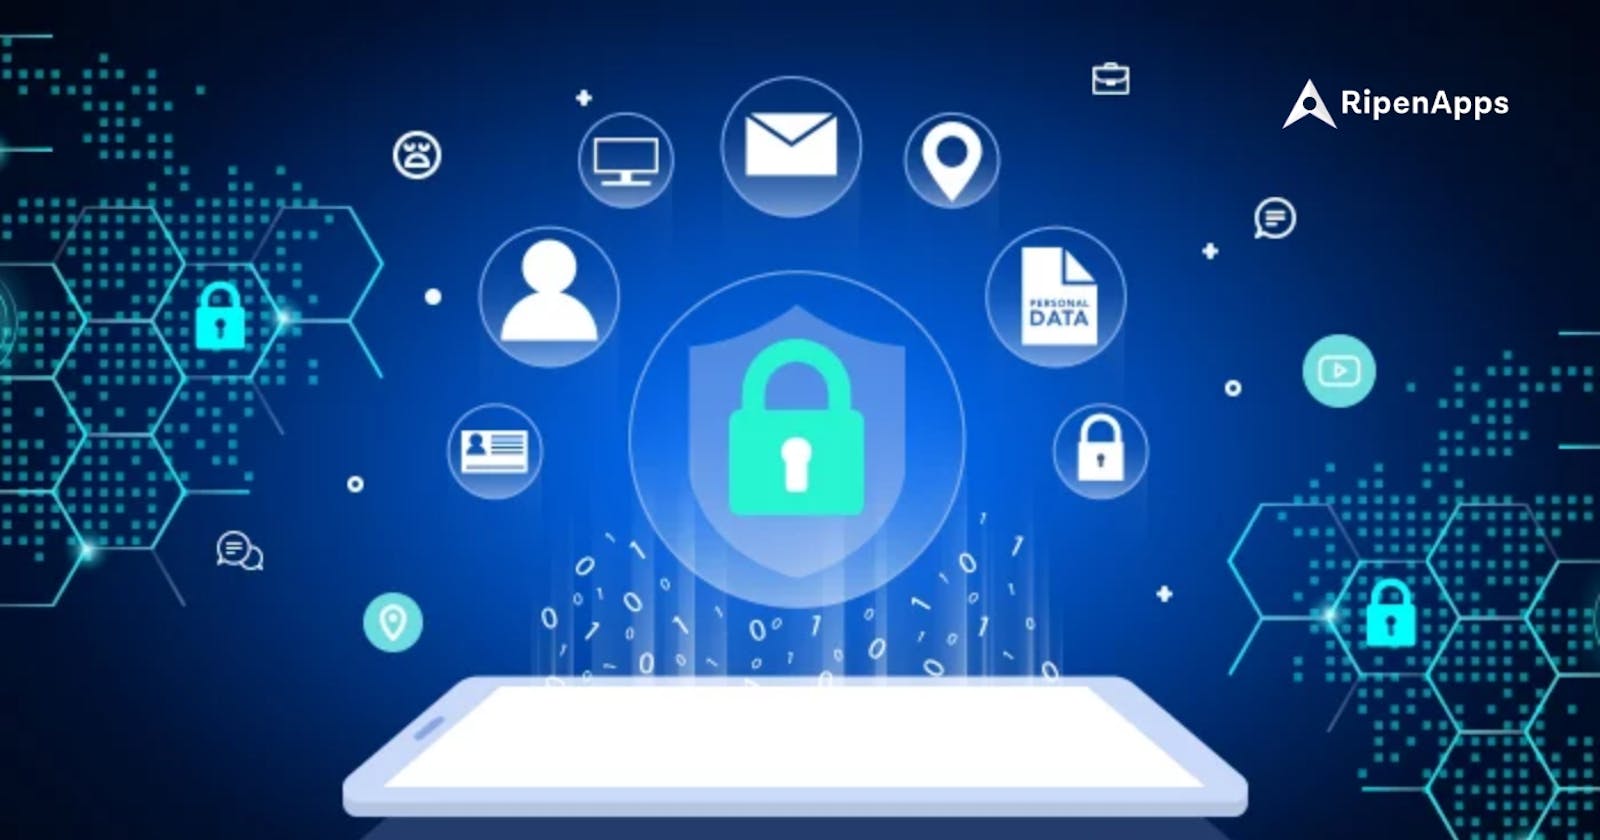 Security Measures to Take While Building a Mobile Application